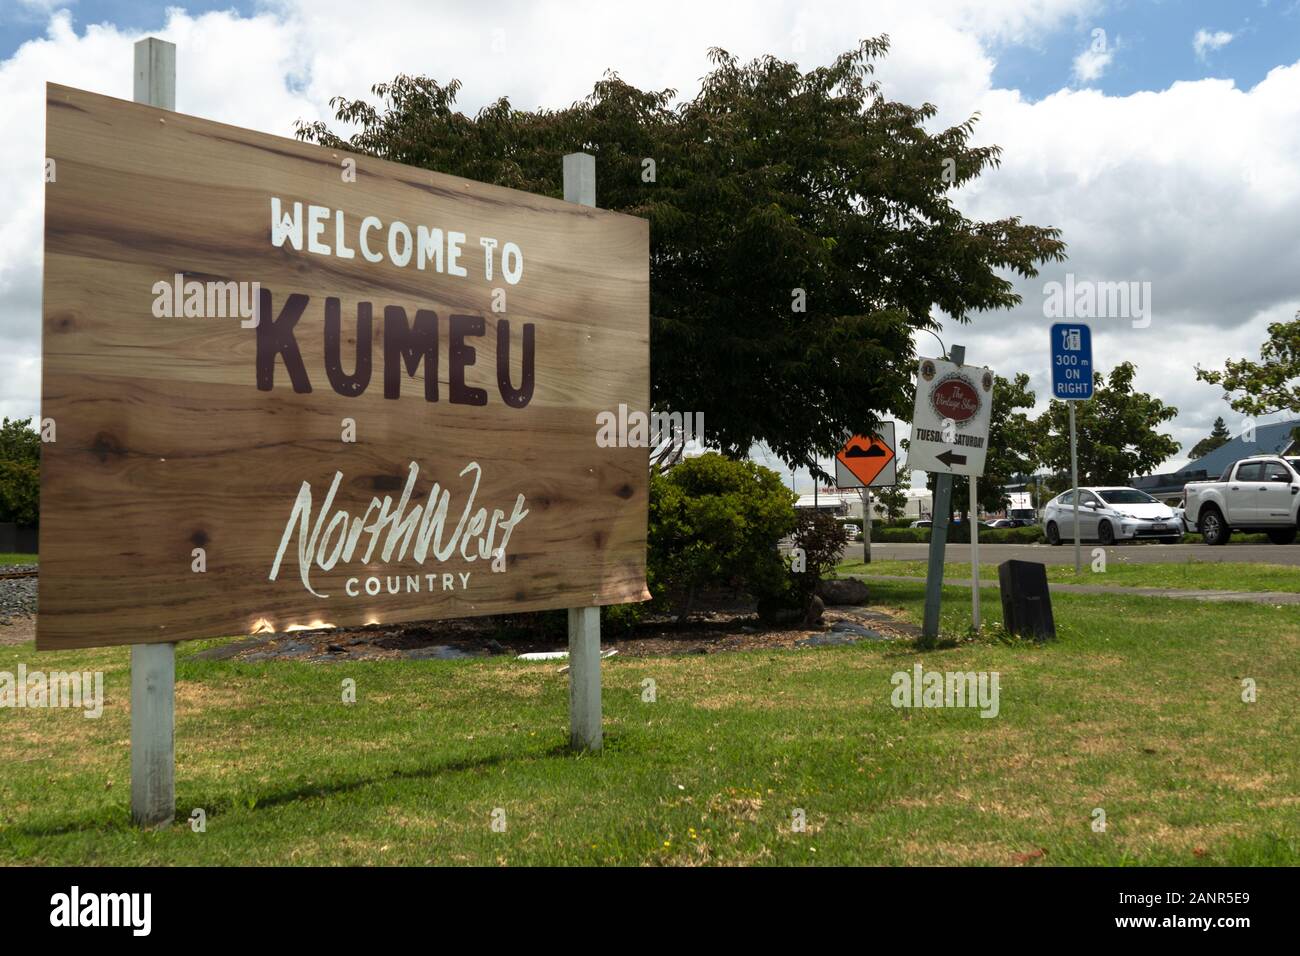 Kumeu, Auckland, New Zealand, Welcome to Kumeu Northwest country wooden road sign, film studios, indoor water tank, avatar, the meg, lord of the rings Stock Photo